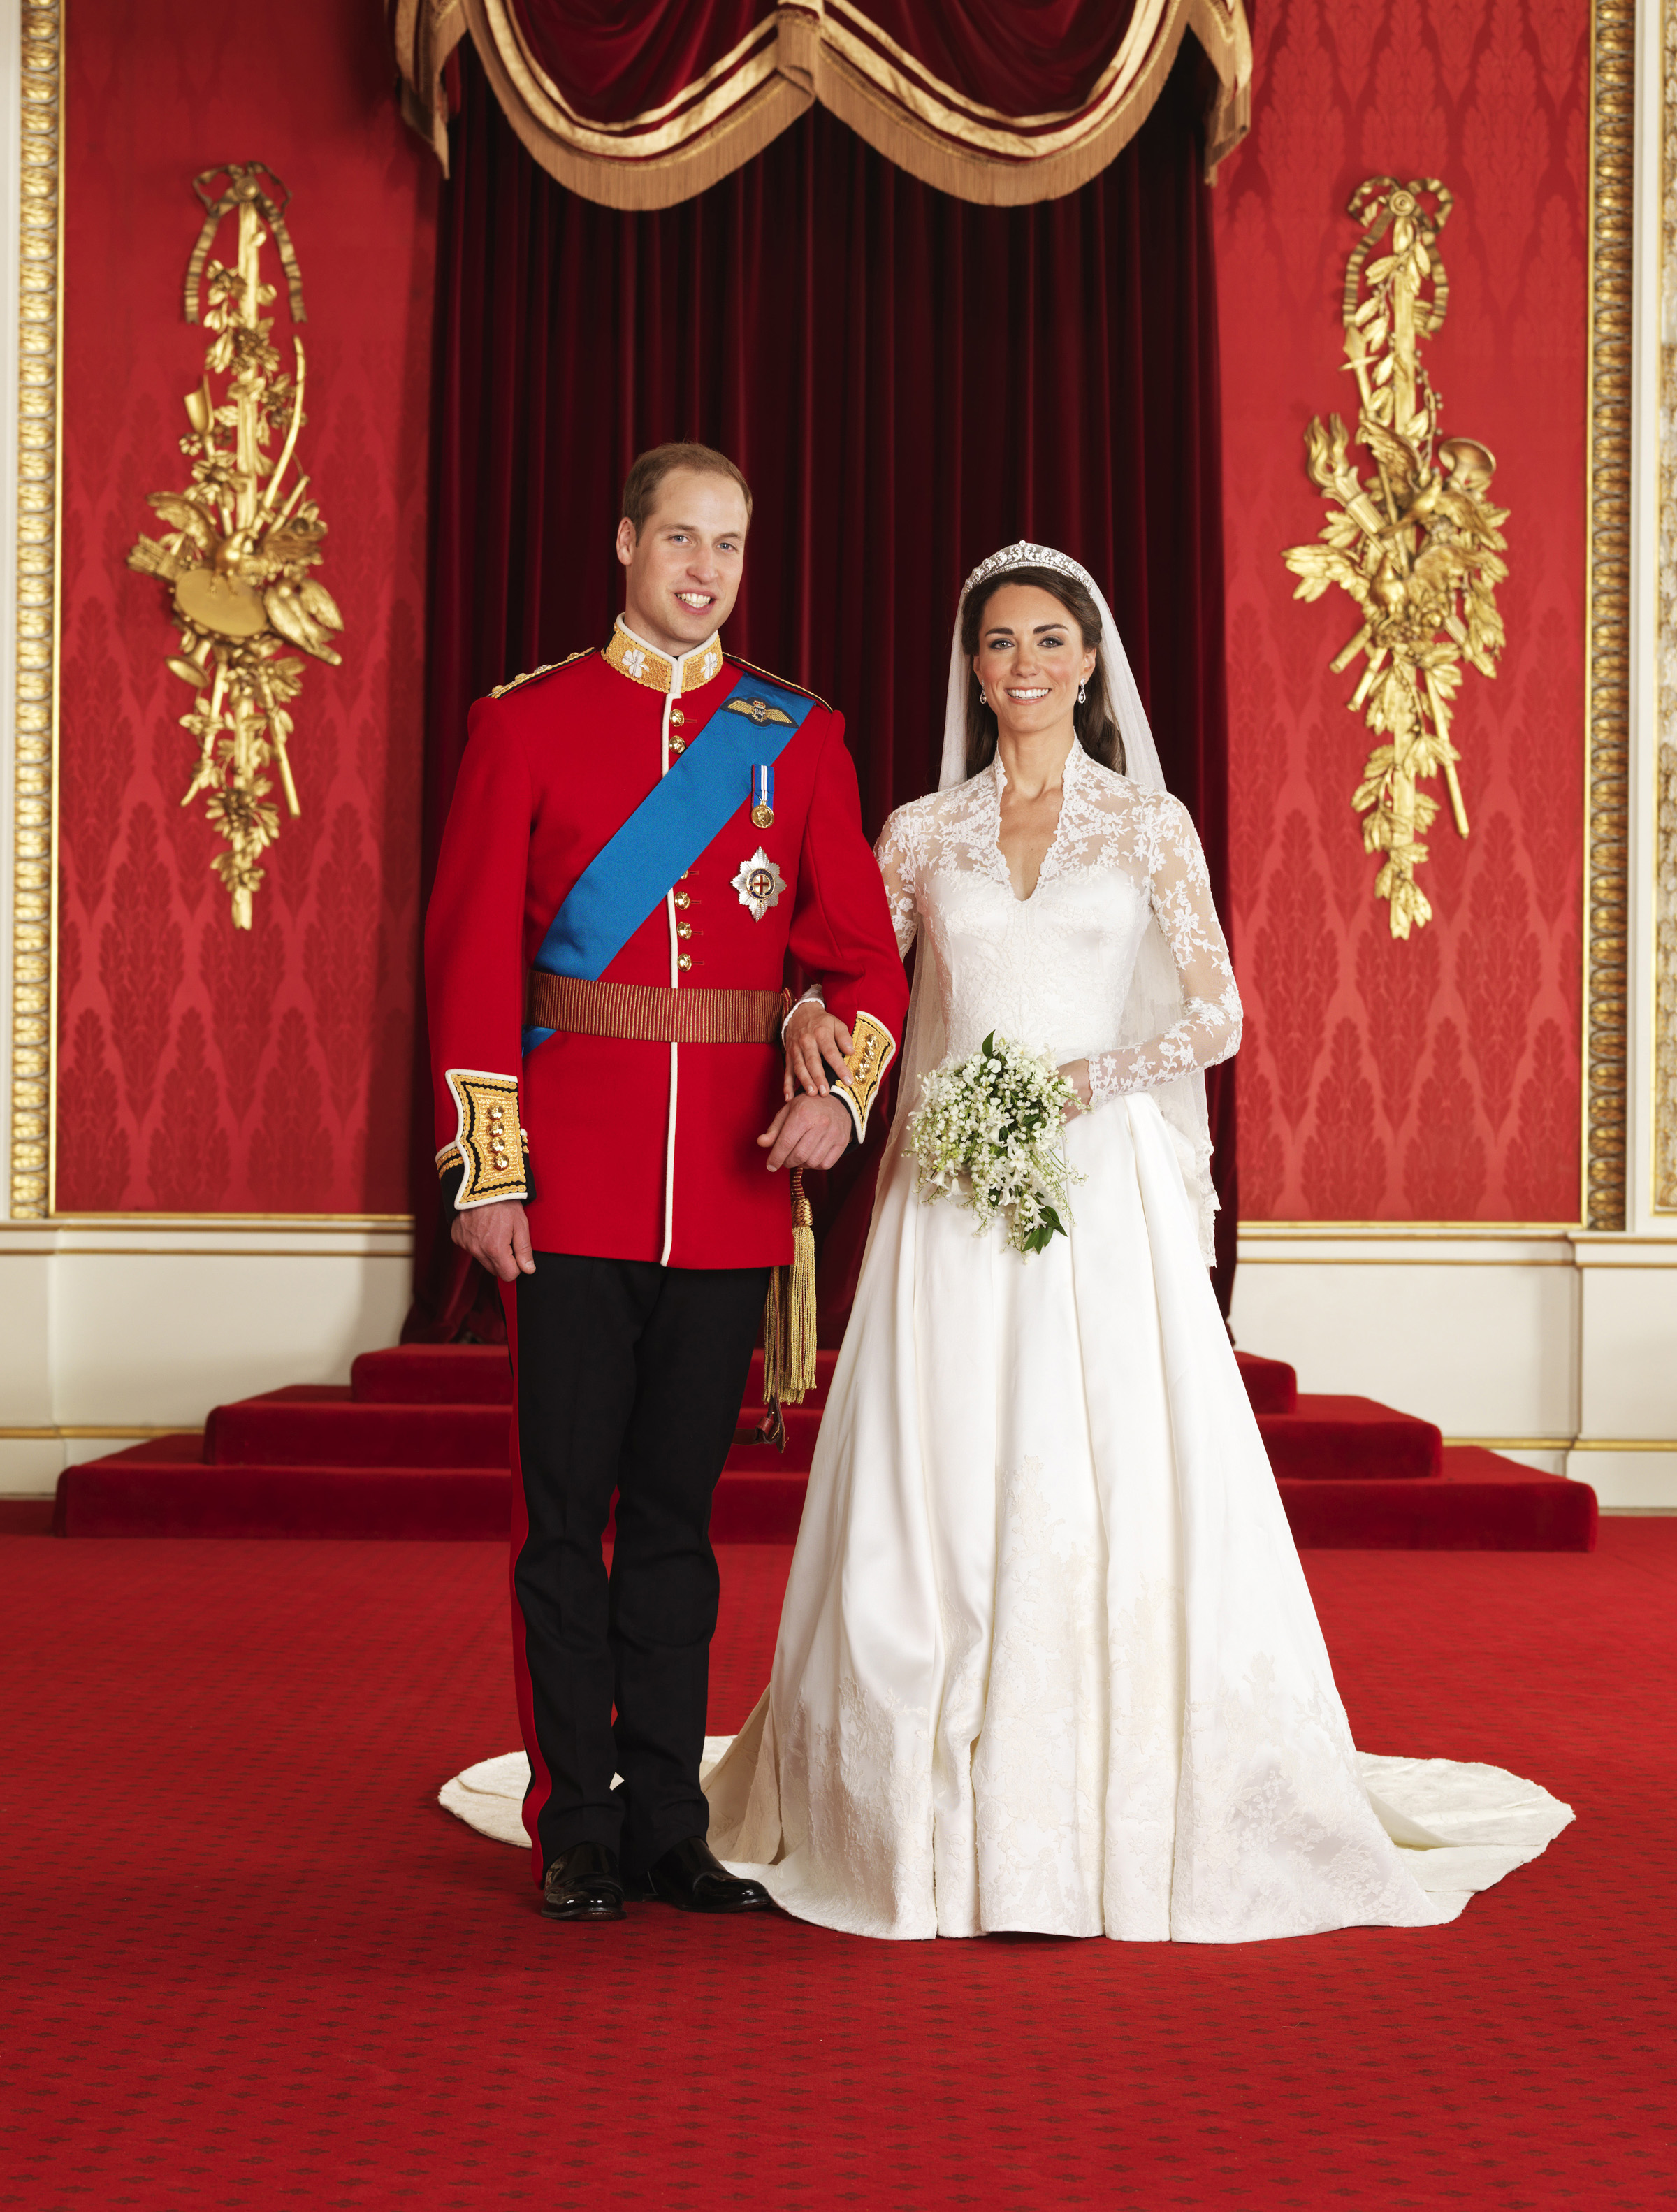 Kate Middleton Nude Photos: Published in Denmark! - The 